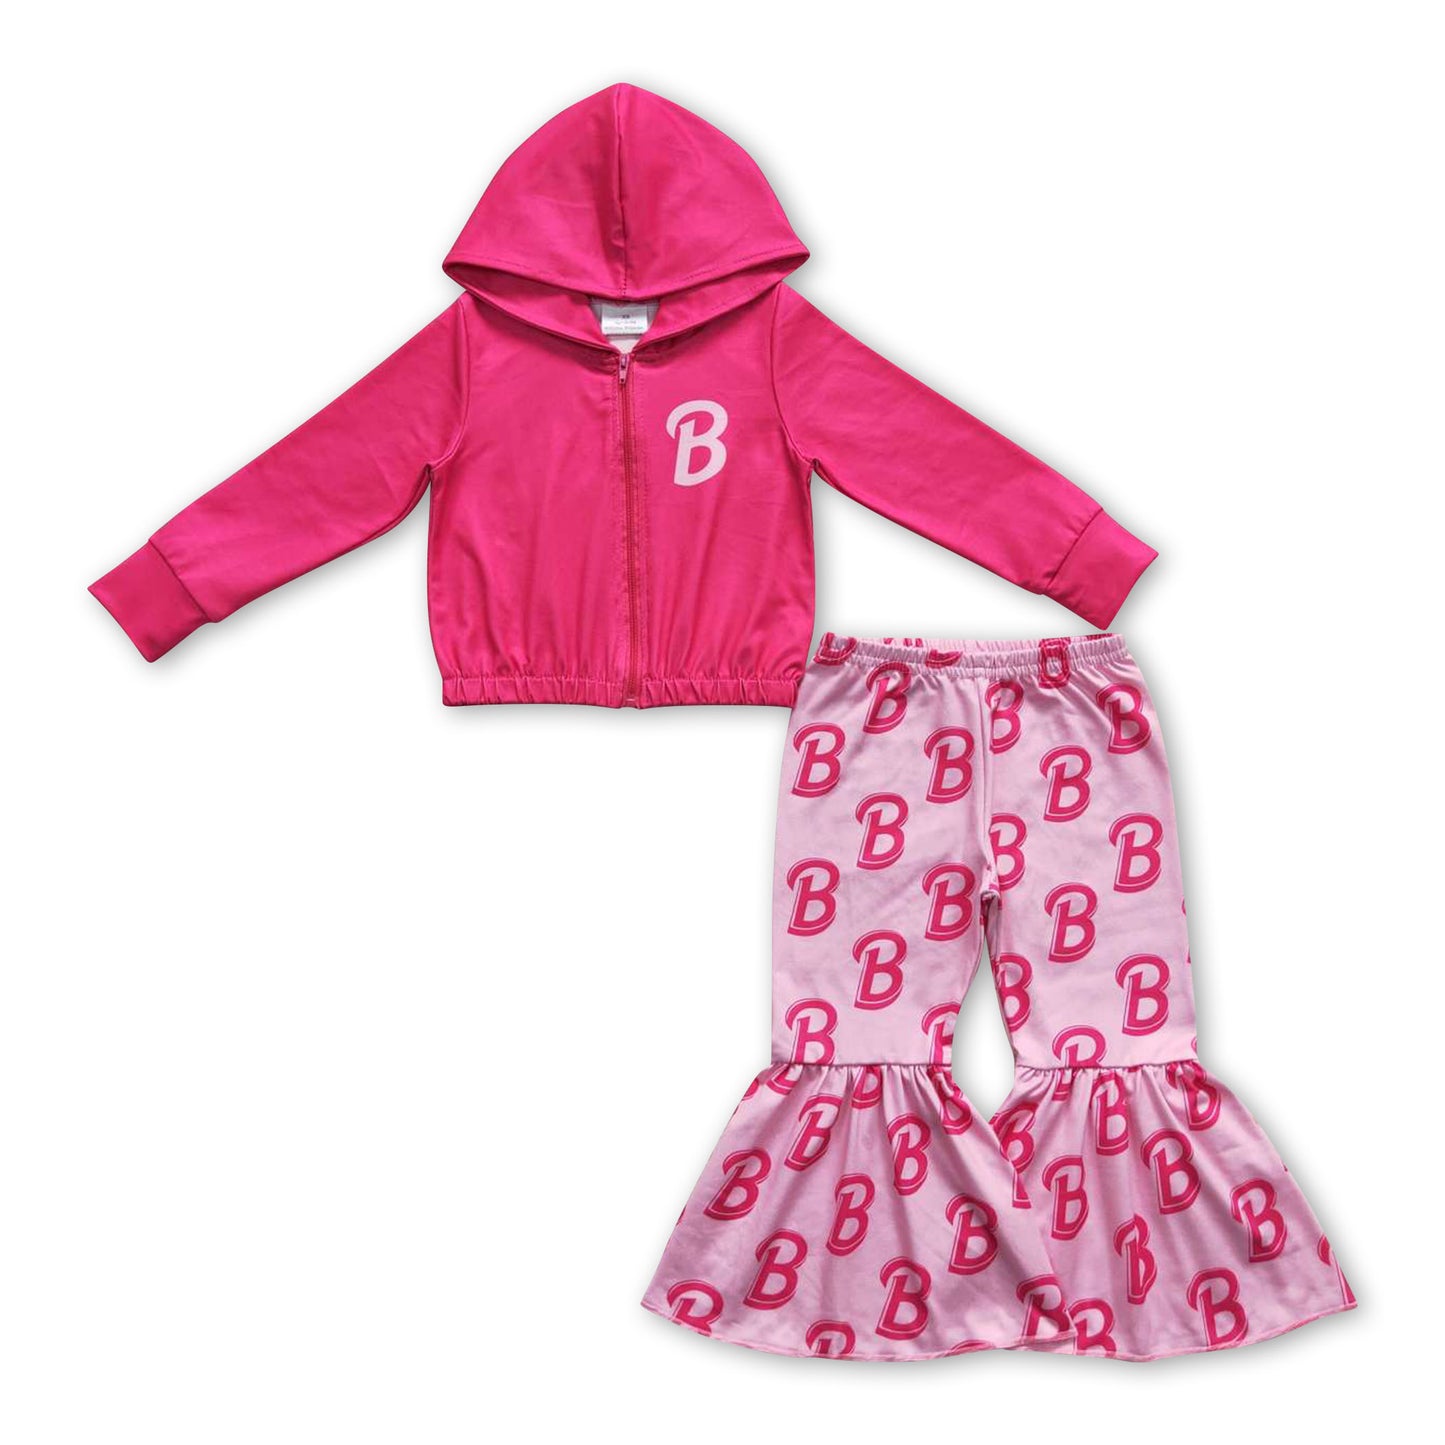 Hot pink B hooded jacket pants party girls outfits – Yawoo Garments